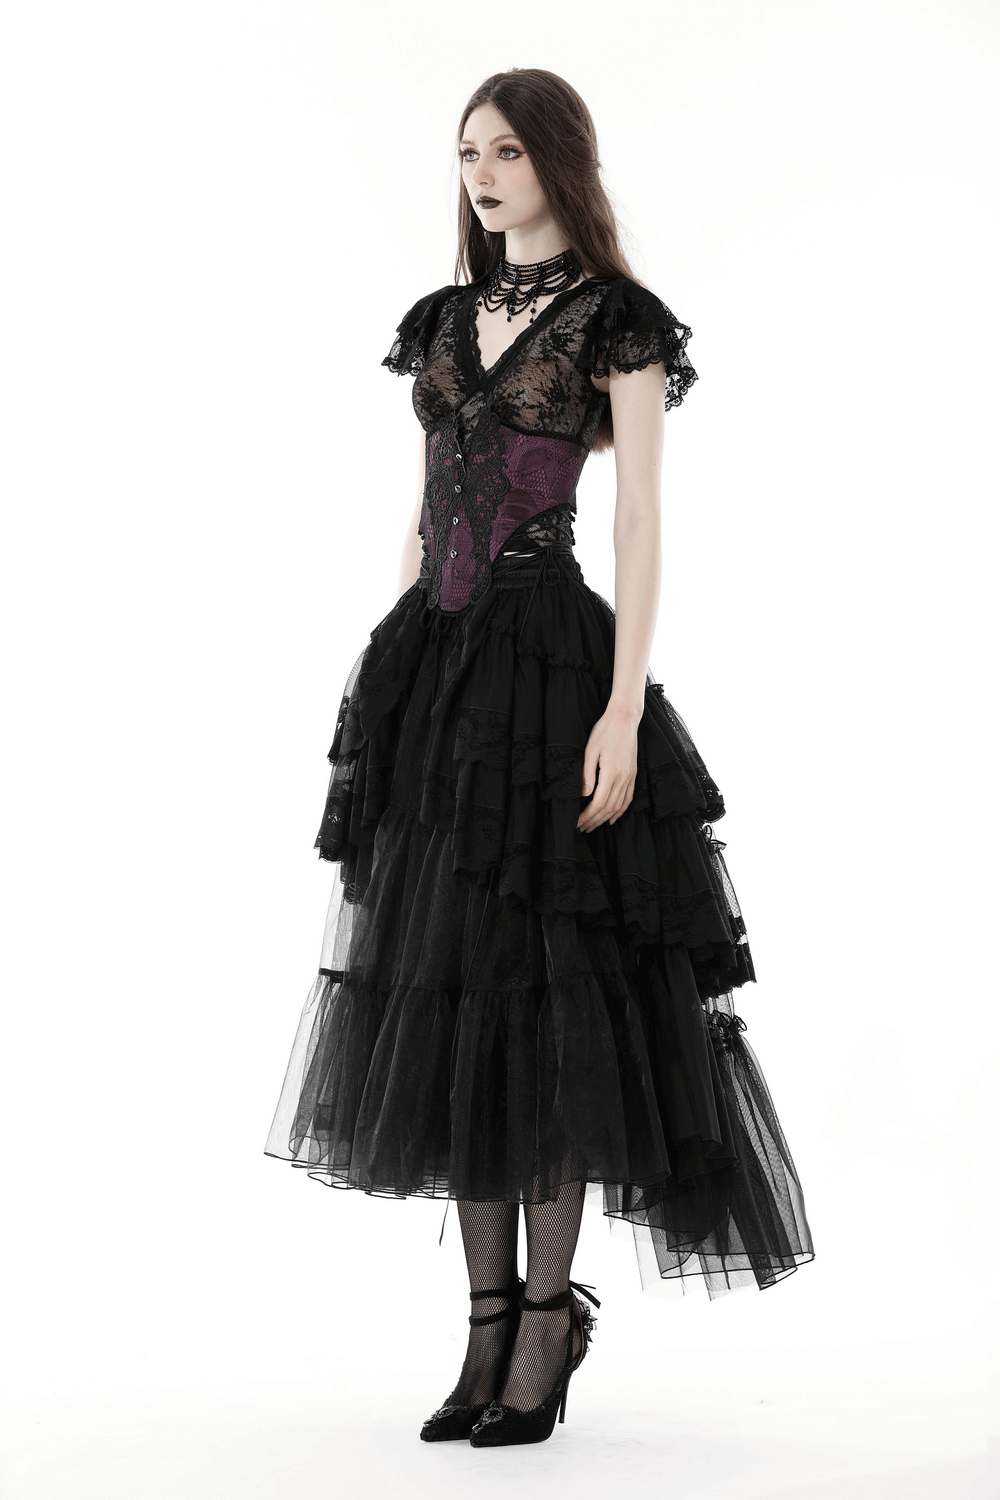 Women's Mesh Gothic Skirt with Lace and Dramatic Ruffles